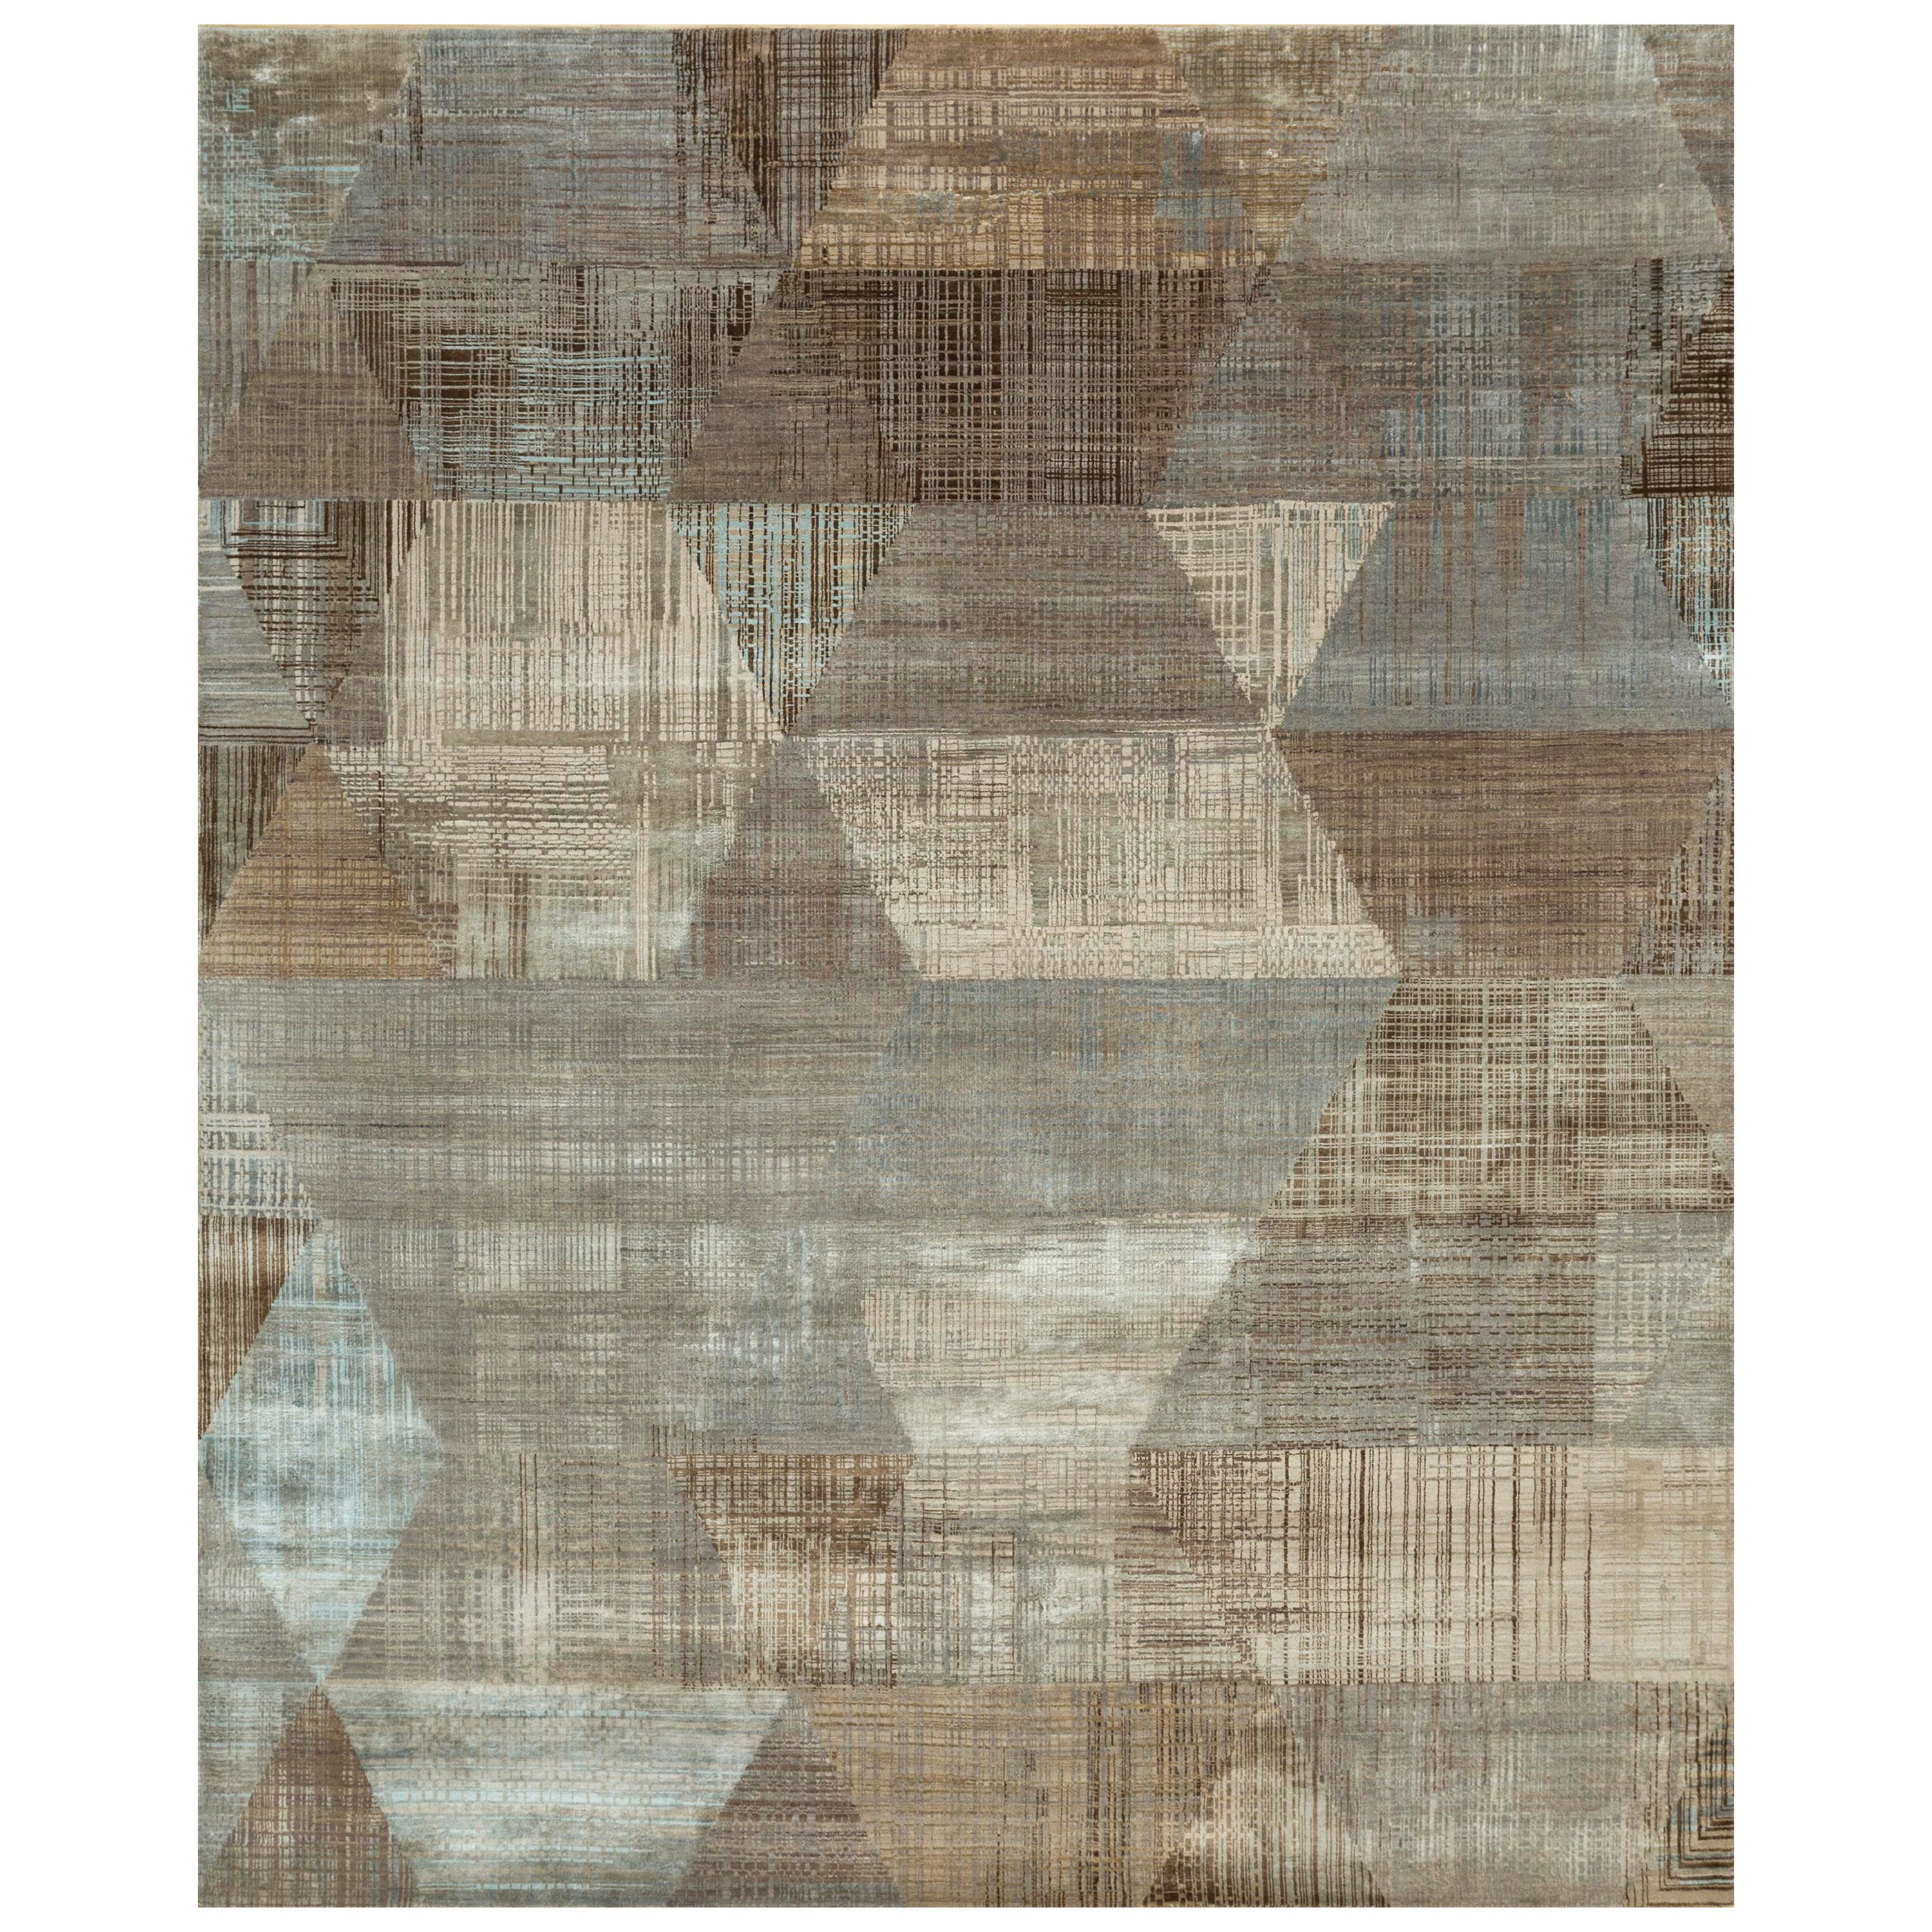 Ashen Whispers Ashwood Antique White 195X295 cm Hand-Knotted Rug For Sale